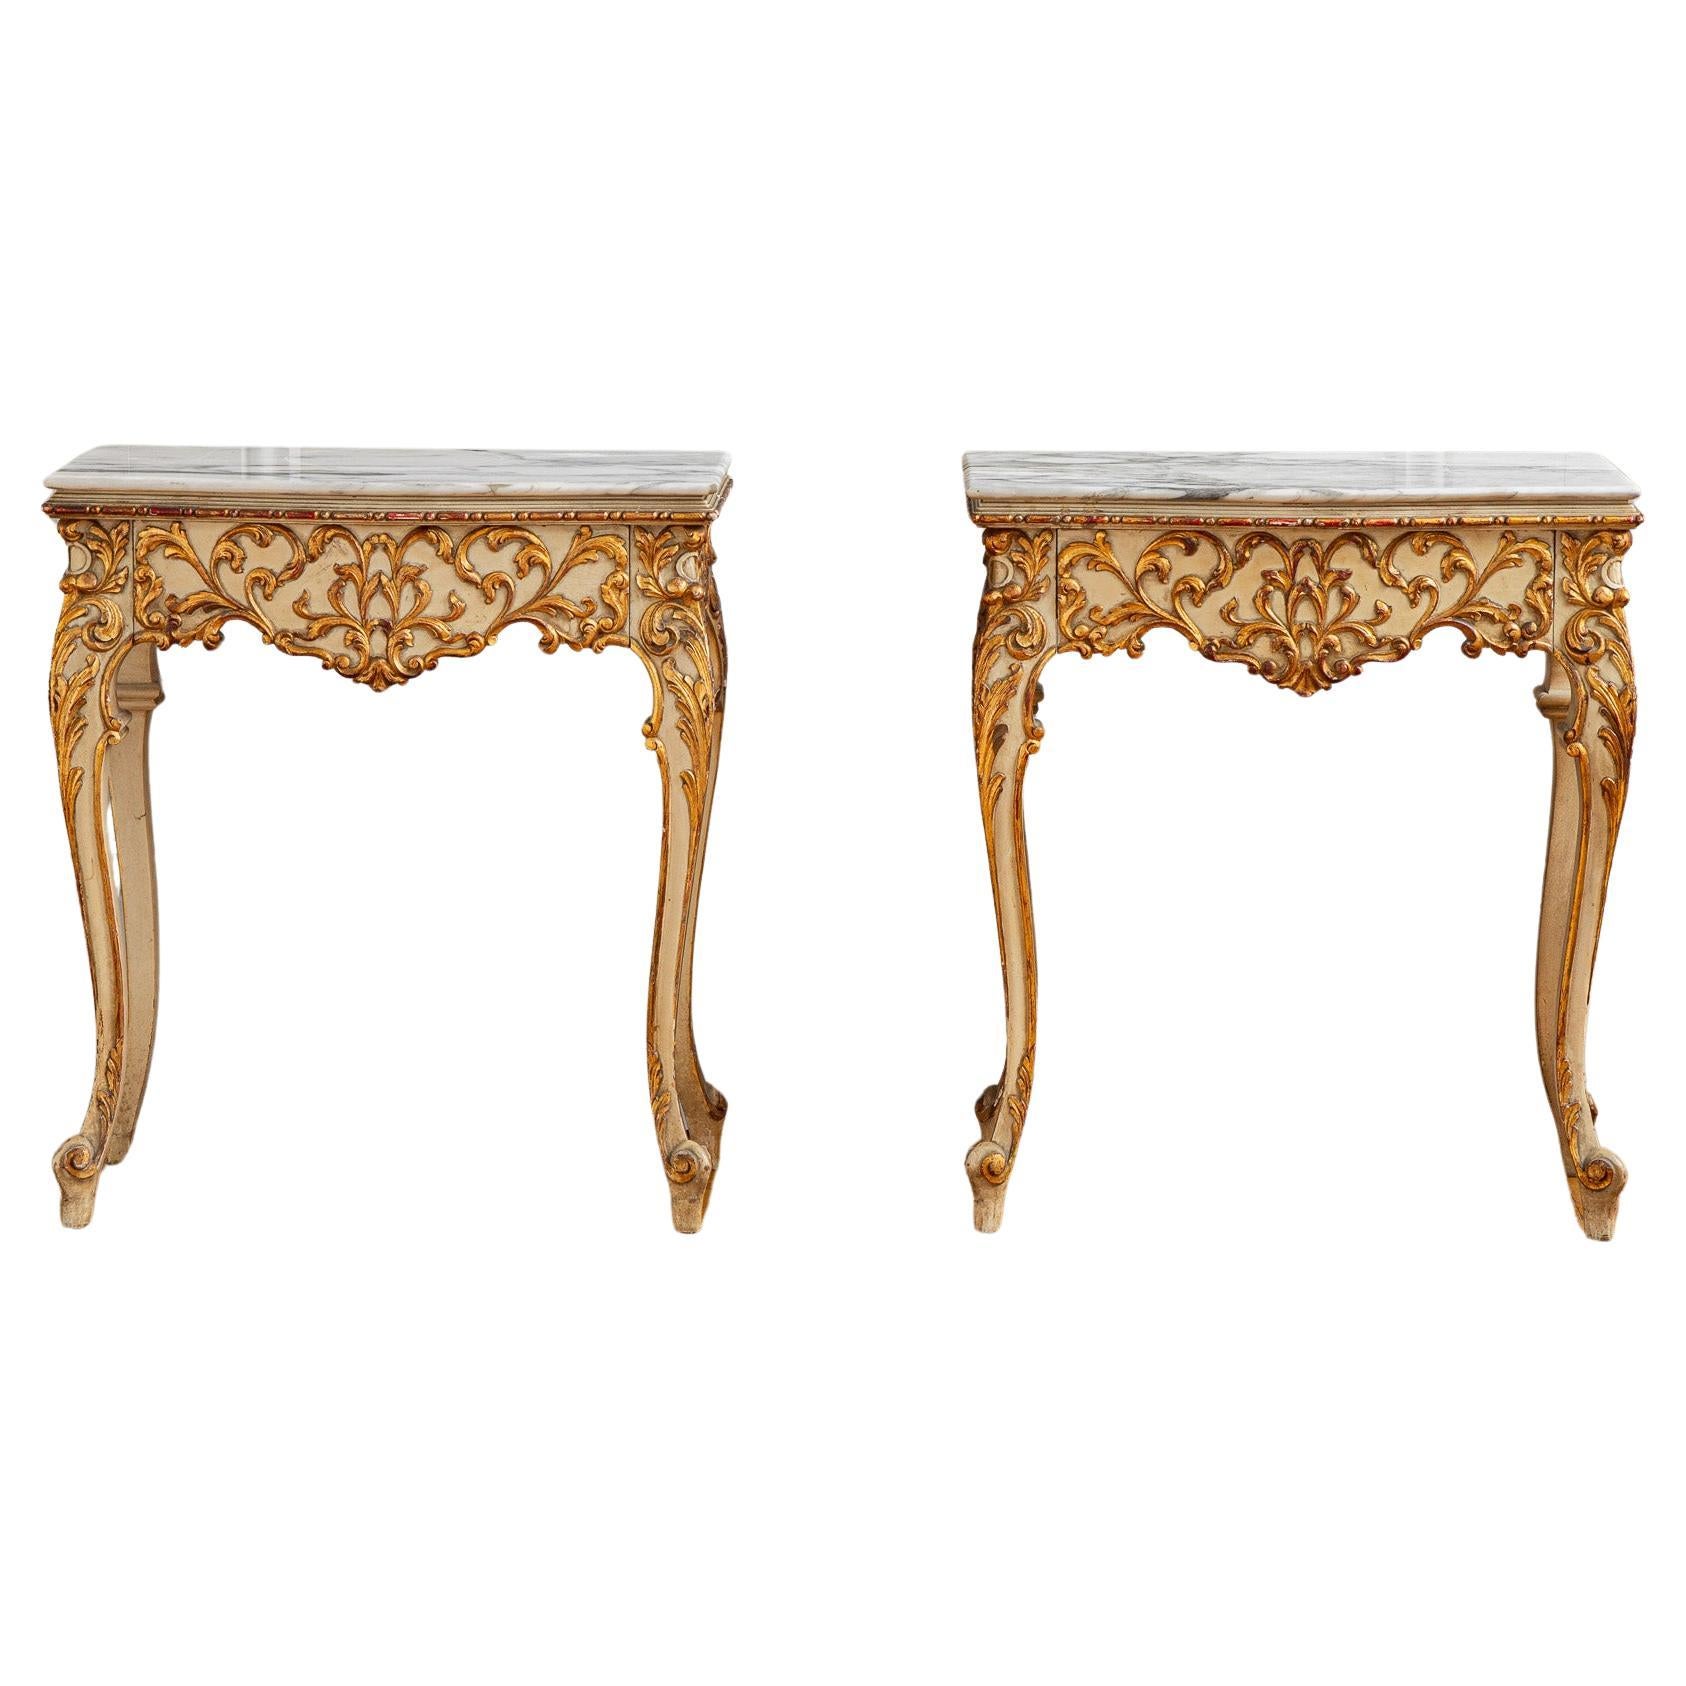 Early 1900's Venetian Style Painted with Giltwood Bedside Tables From Italy For Sale